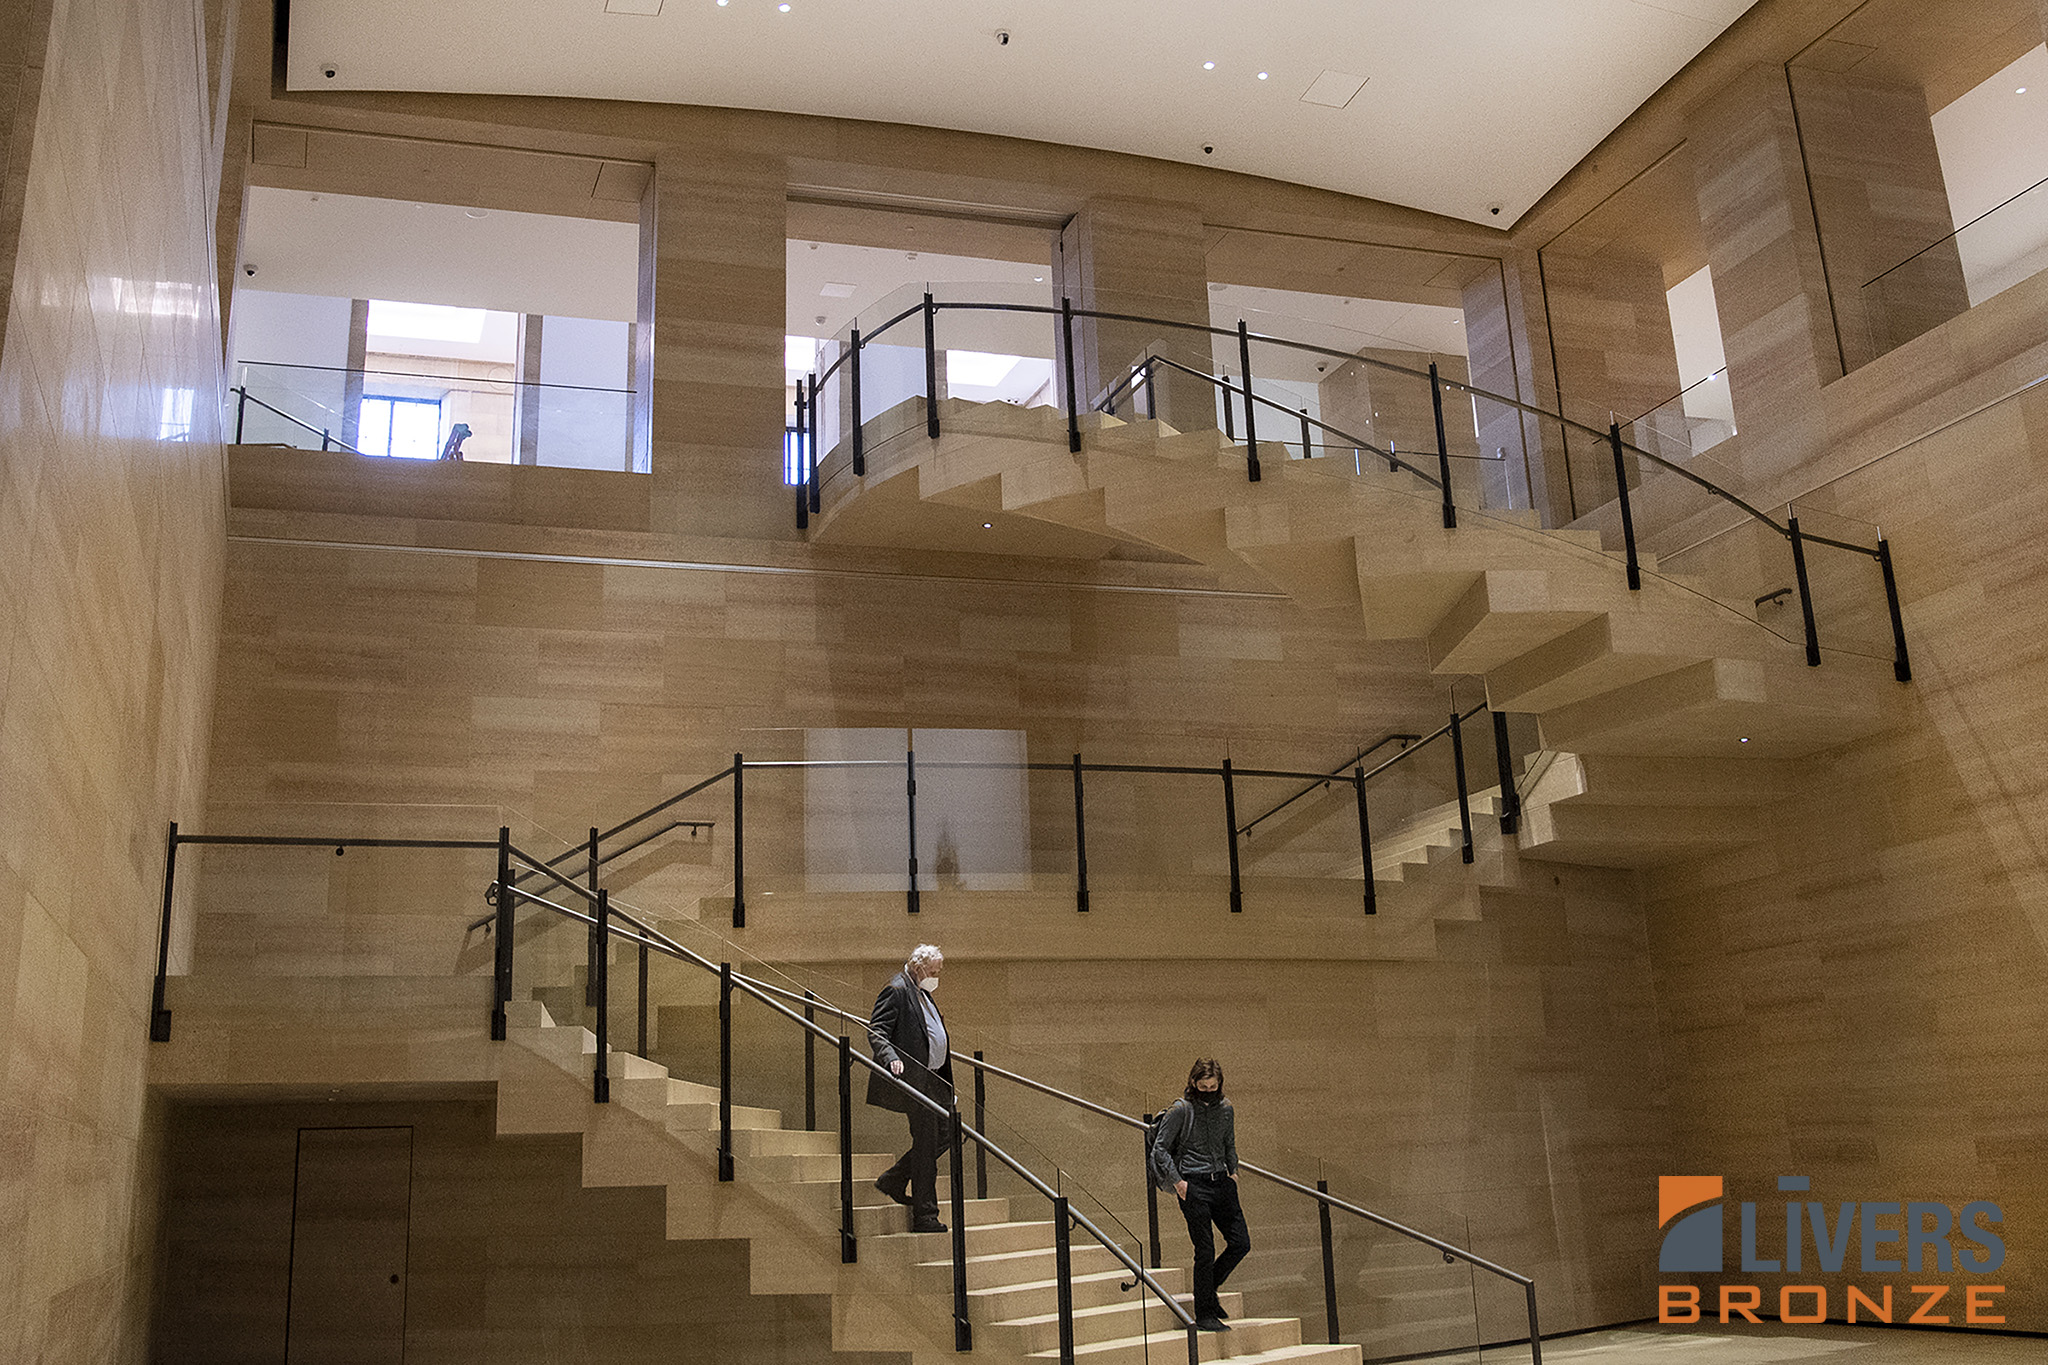 Livers Bronze Custom Bronze Railings were installed at the Lobby Stairs at the Philadelphia Museum Of Art and were made in the USA.